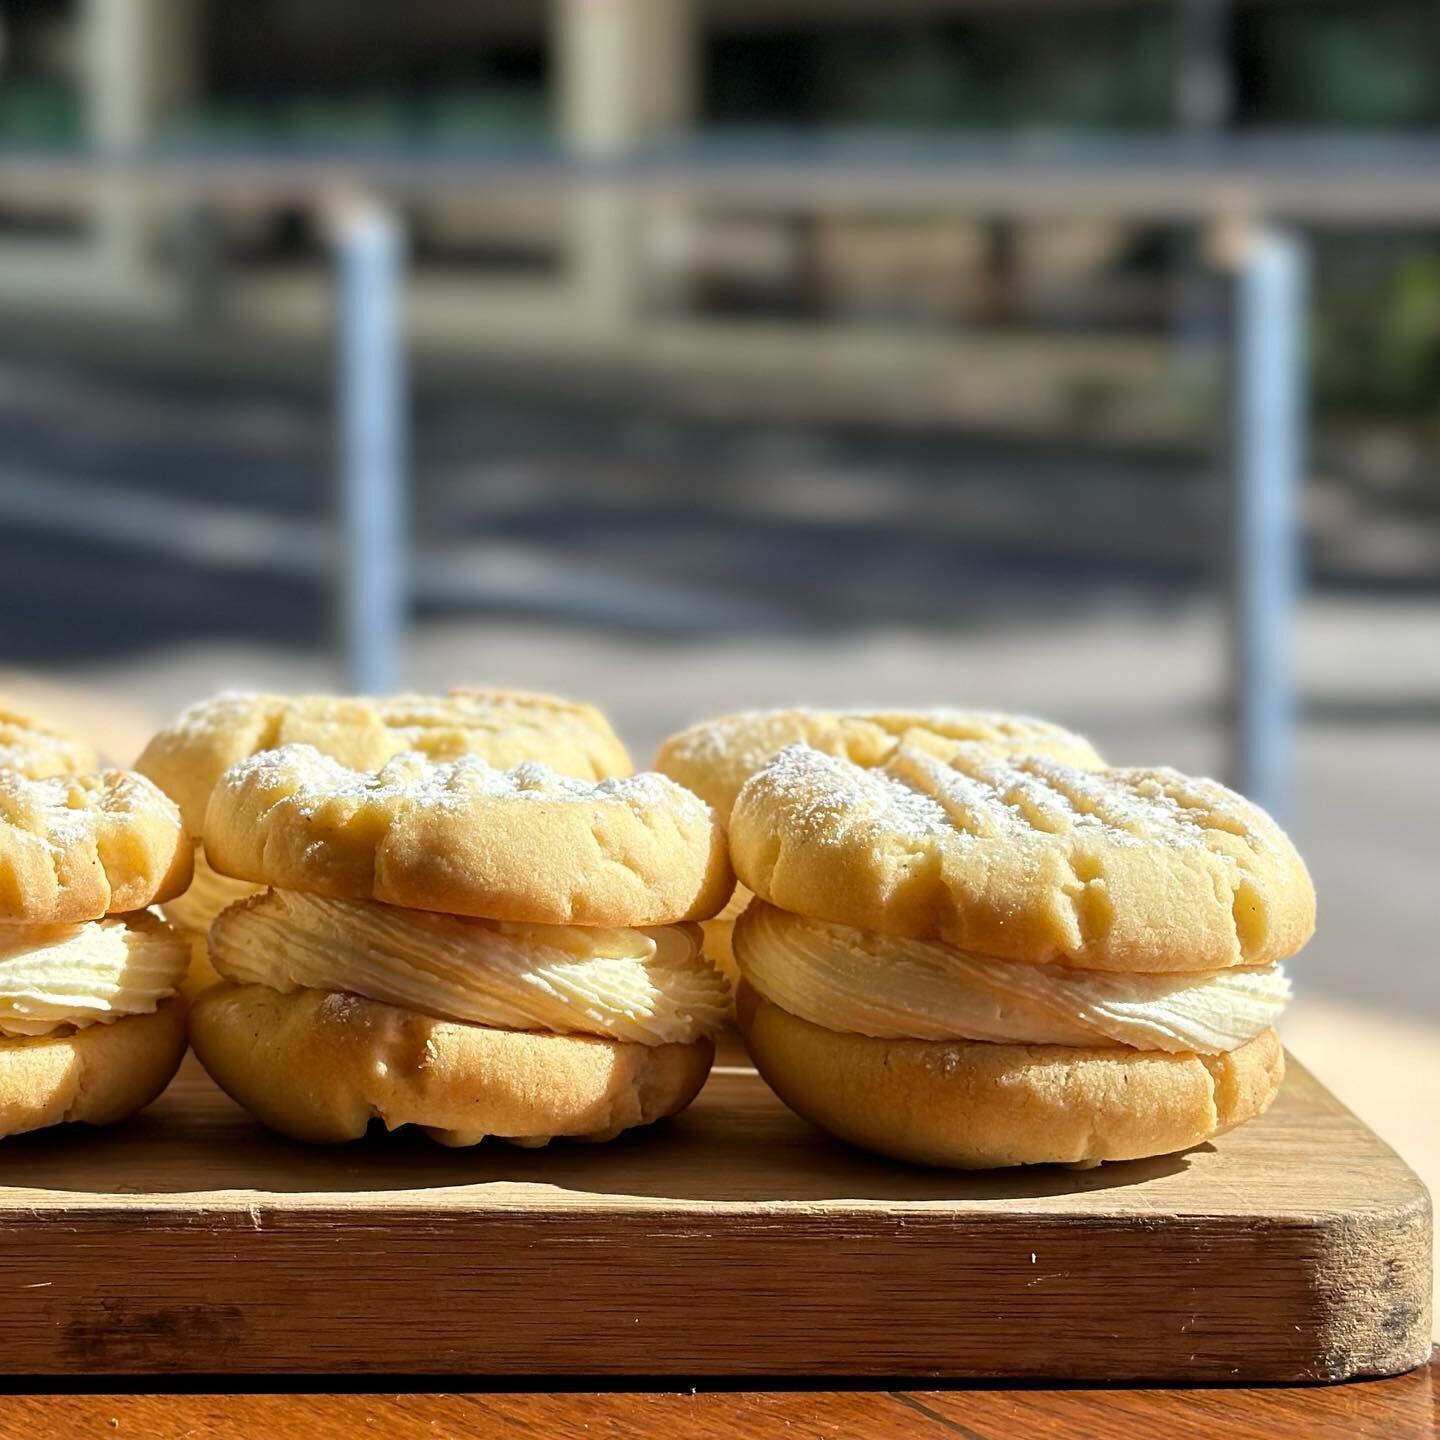 House made melting moments 🤤
$4 each.. come get them before they run out! 
.
.
.
#cafe #brisbane #Queensland #coffee #dogs
#breakfast #lunch #food #nundah #petfriendly #nundahcornercafe #eats #brisbanecafe #theweekendeditionbrisbane #nundahfood #has